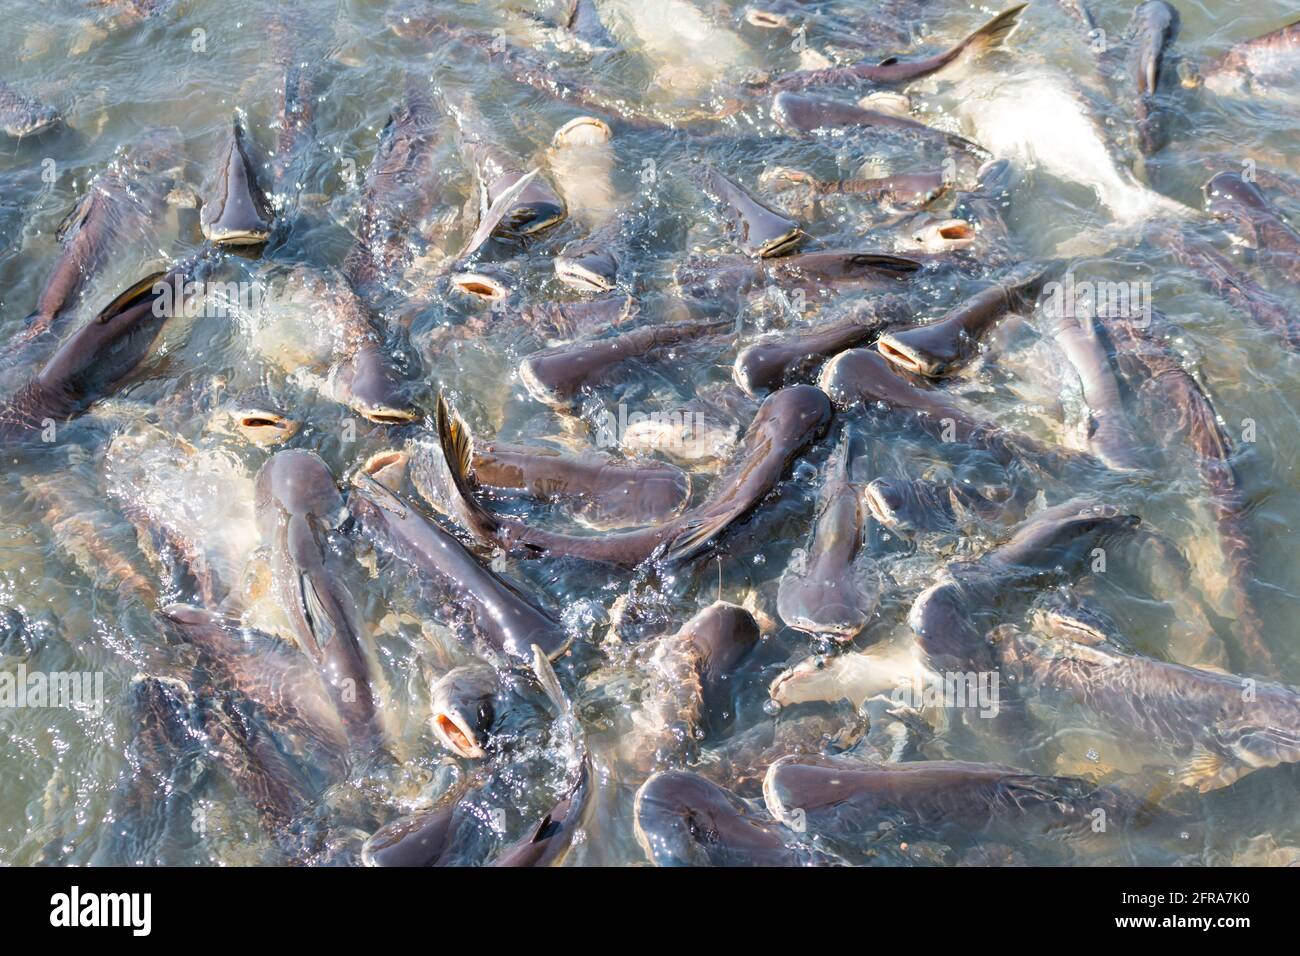 Pangasius fish try to eat the food Stock Photo